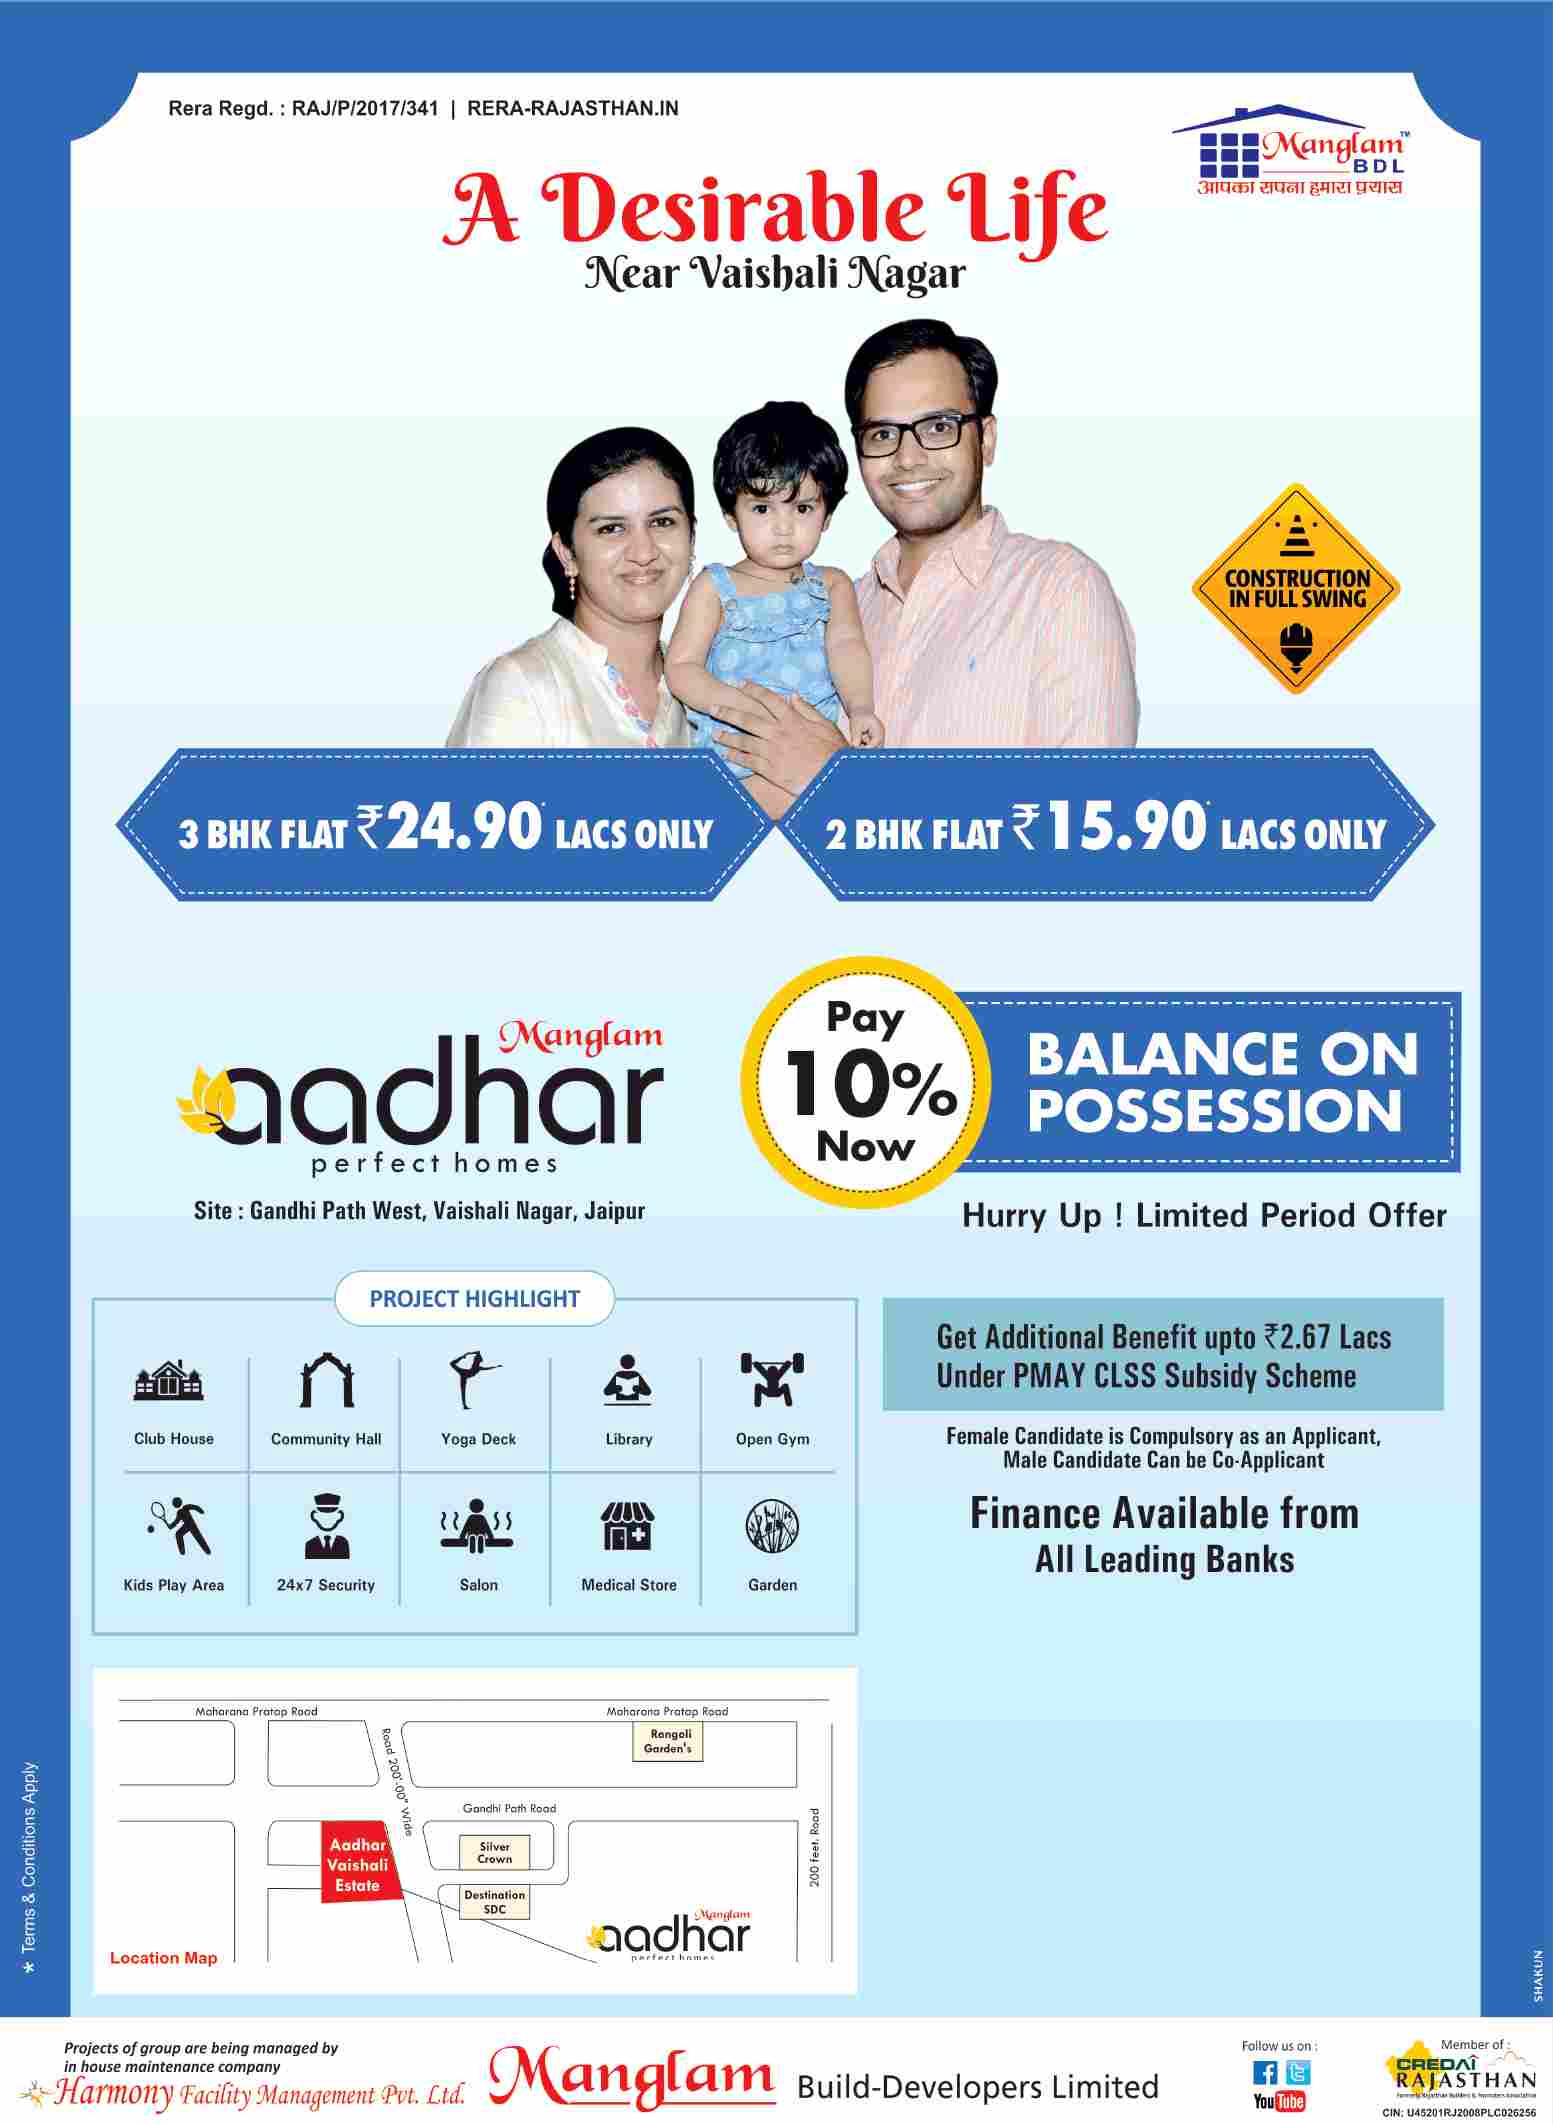 Pay 10% now and balance on possession at Mangalam Aadhar in Jaipur